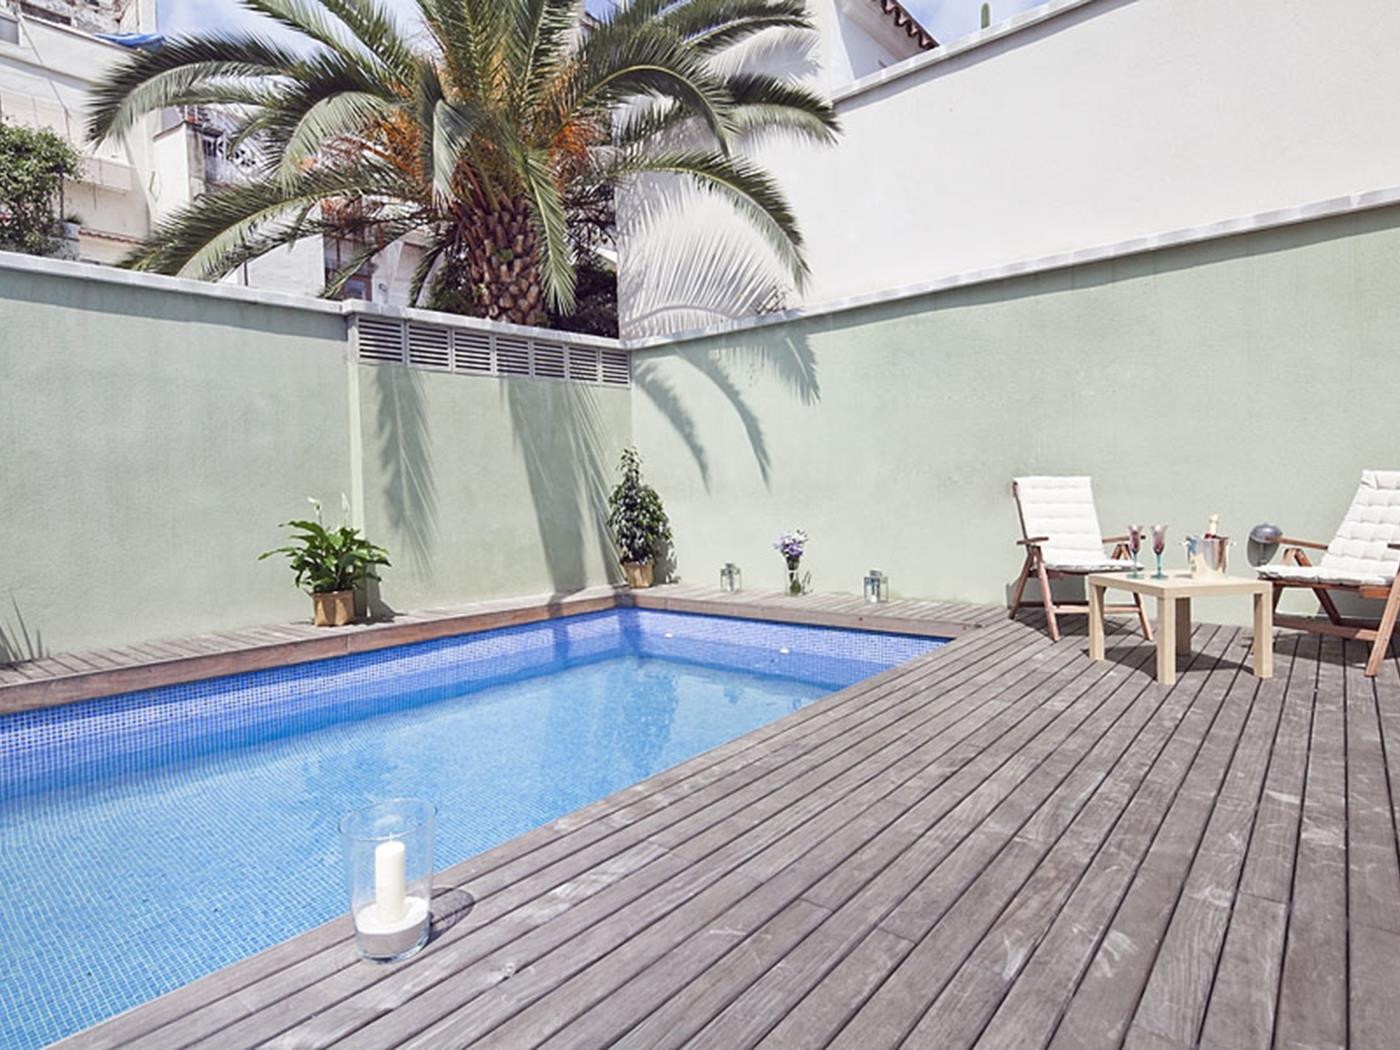 Apartment with Terrace and Pool in Sagrada Familia for 6 - My Space Barcelona Apartments